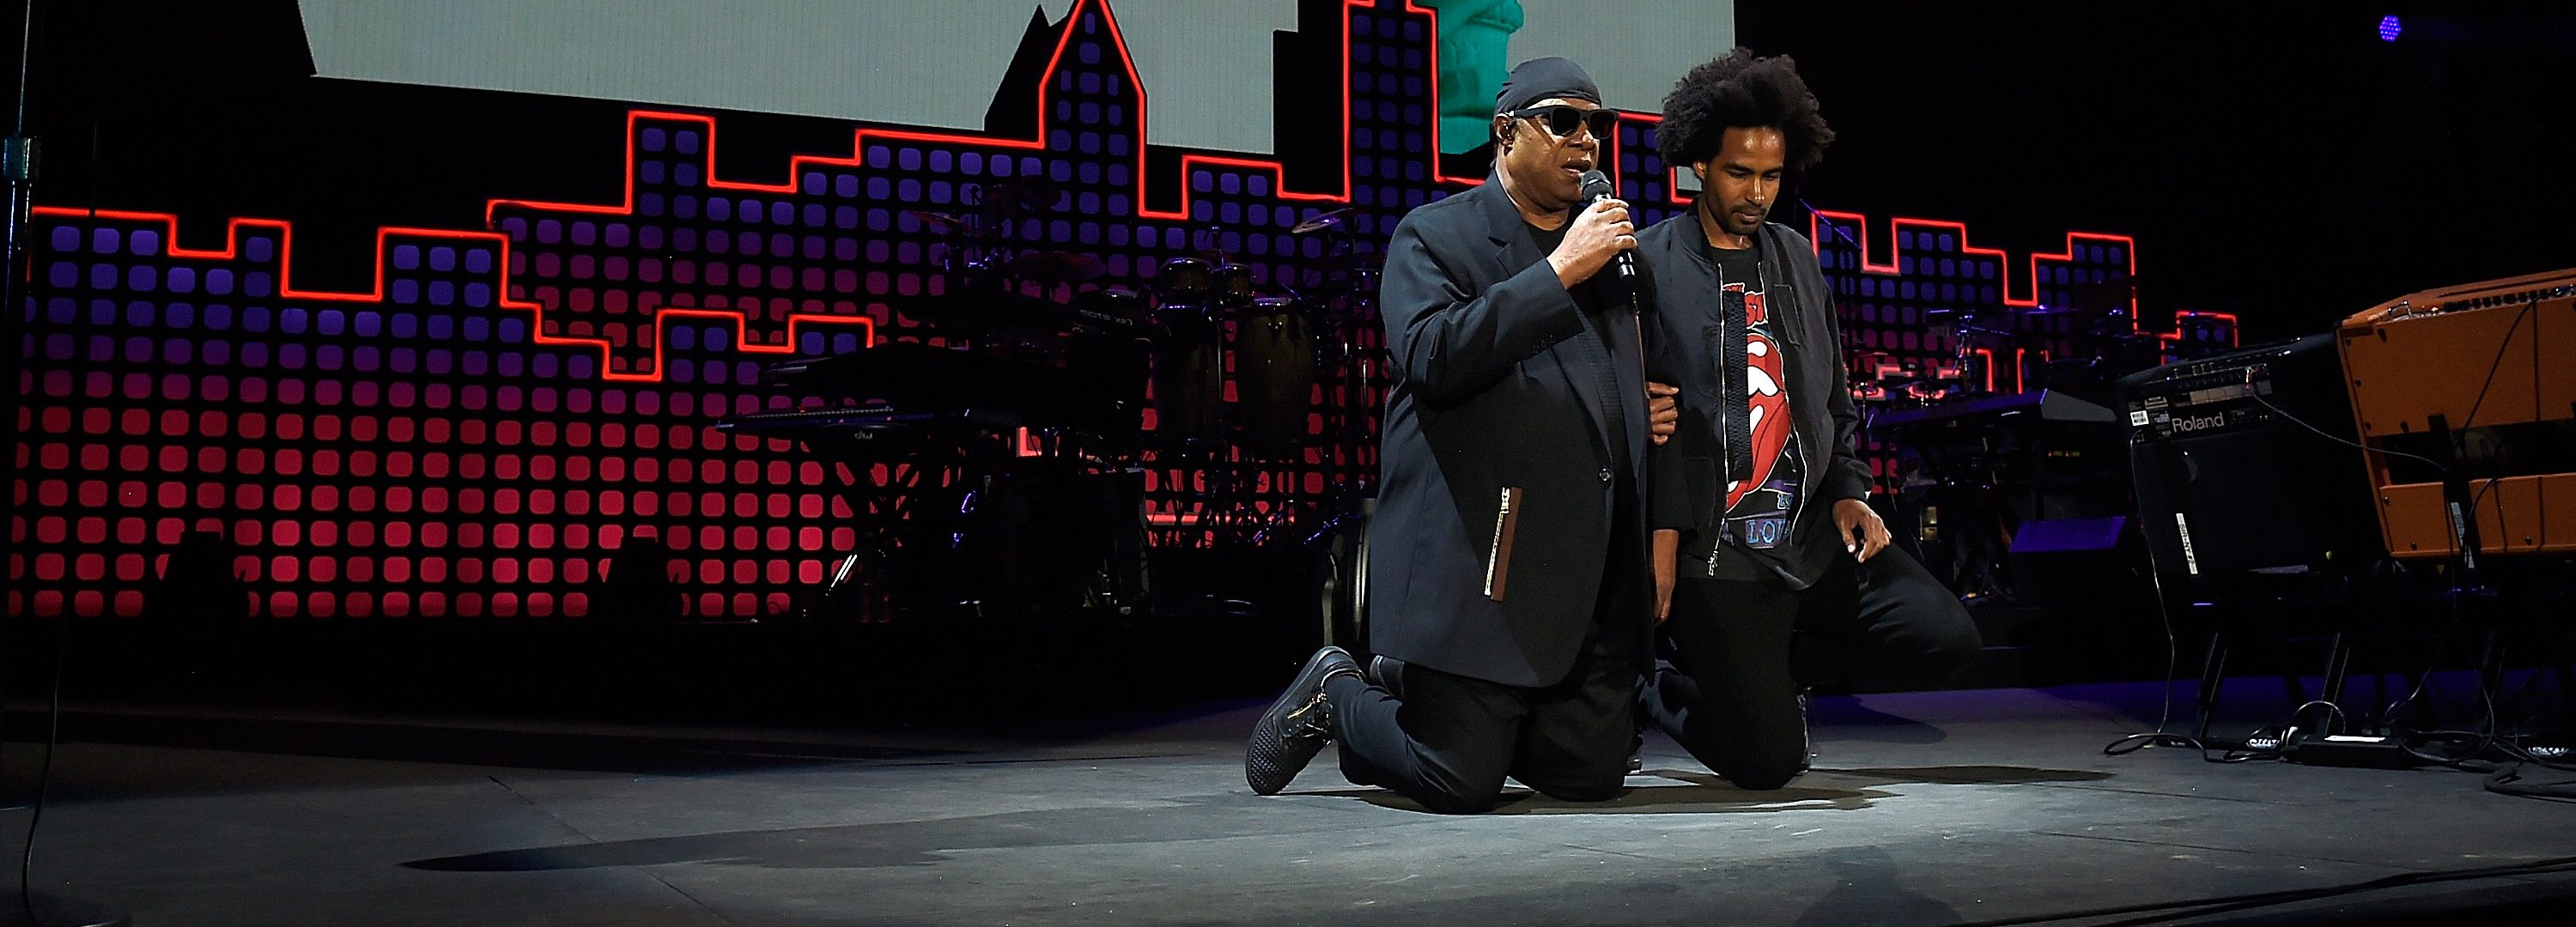 Stevie Wonder and Kwame Morris perform onstage during the 2017 Global Citizen Festival: For Freedom. For Justice. For All. in Central Park on September 23, 2017 in New York City.  (Photo by Kevin Mazur/Getty Images for Global Citizen)